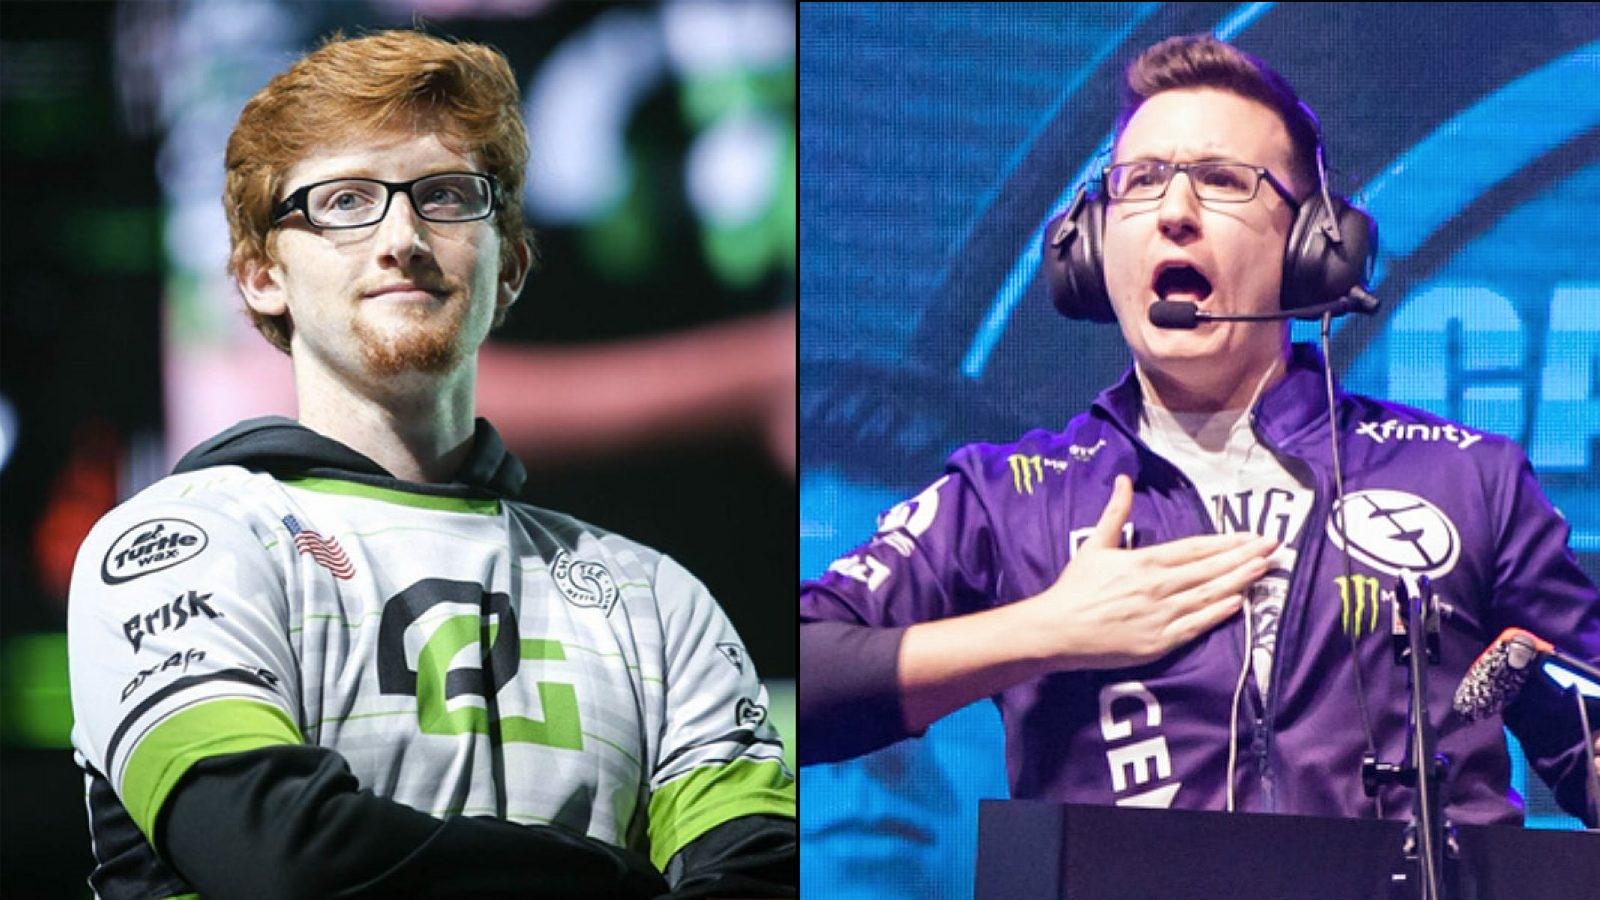 scump and aches side by side